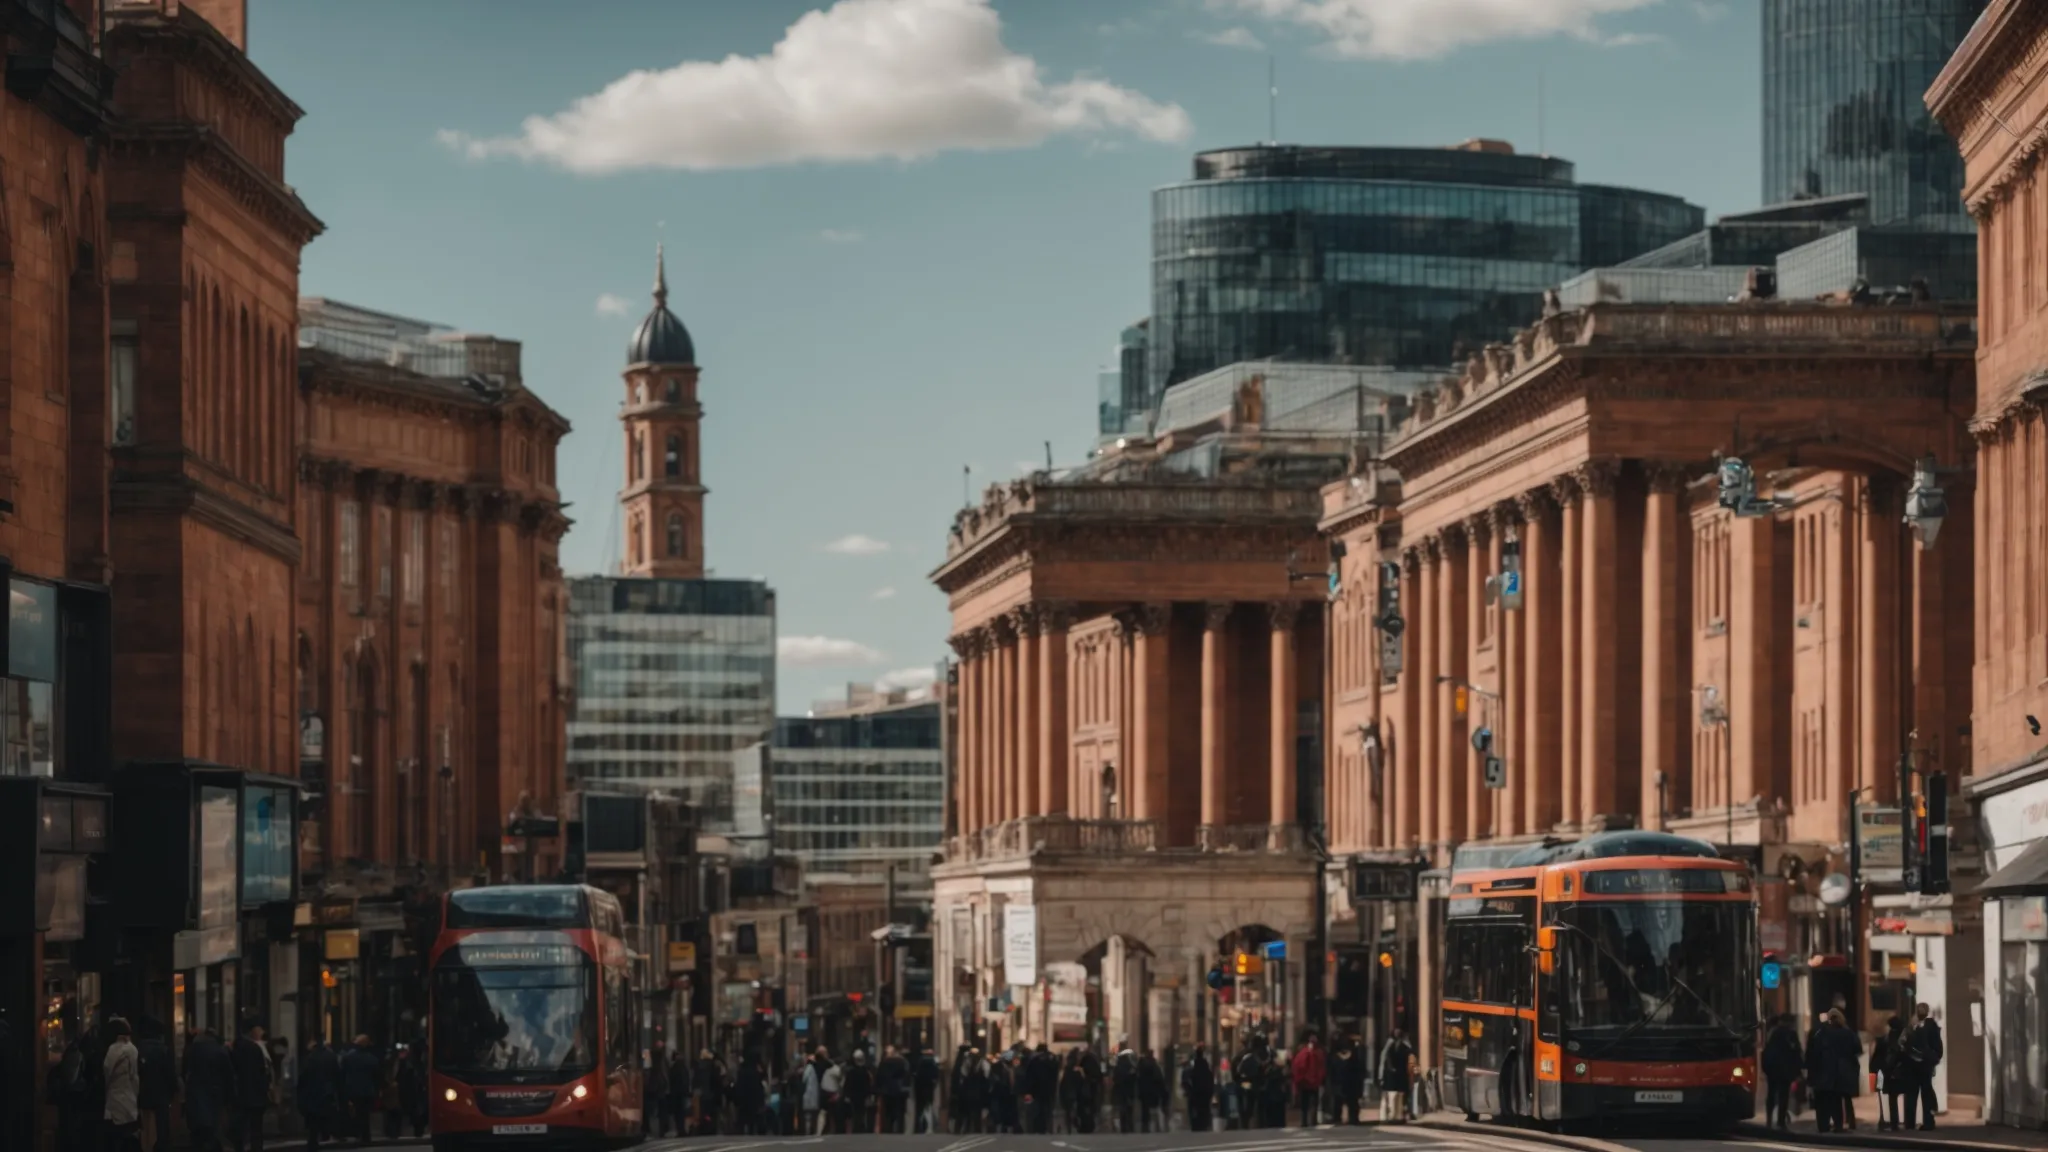 the bustling streets of birmingham city centre alive with diverse architecture, from historic buildings to modern skyscrapers, under a bright sky.